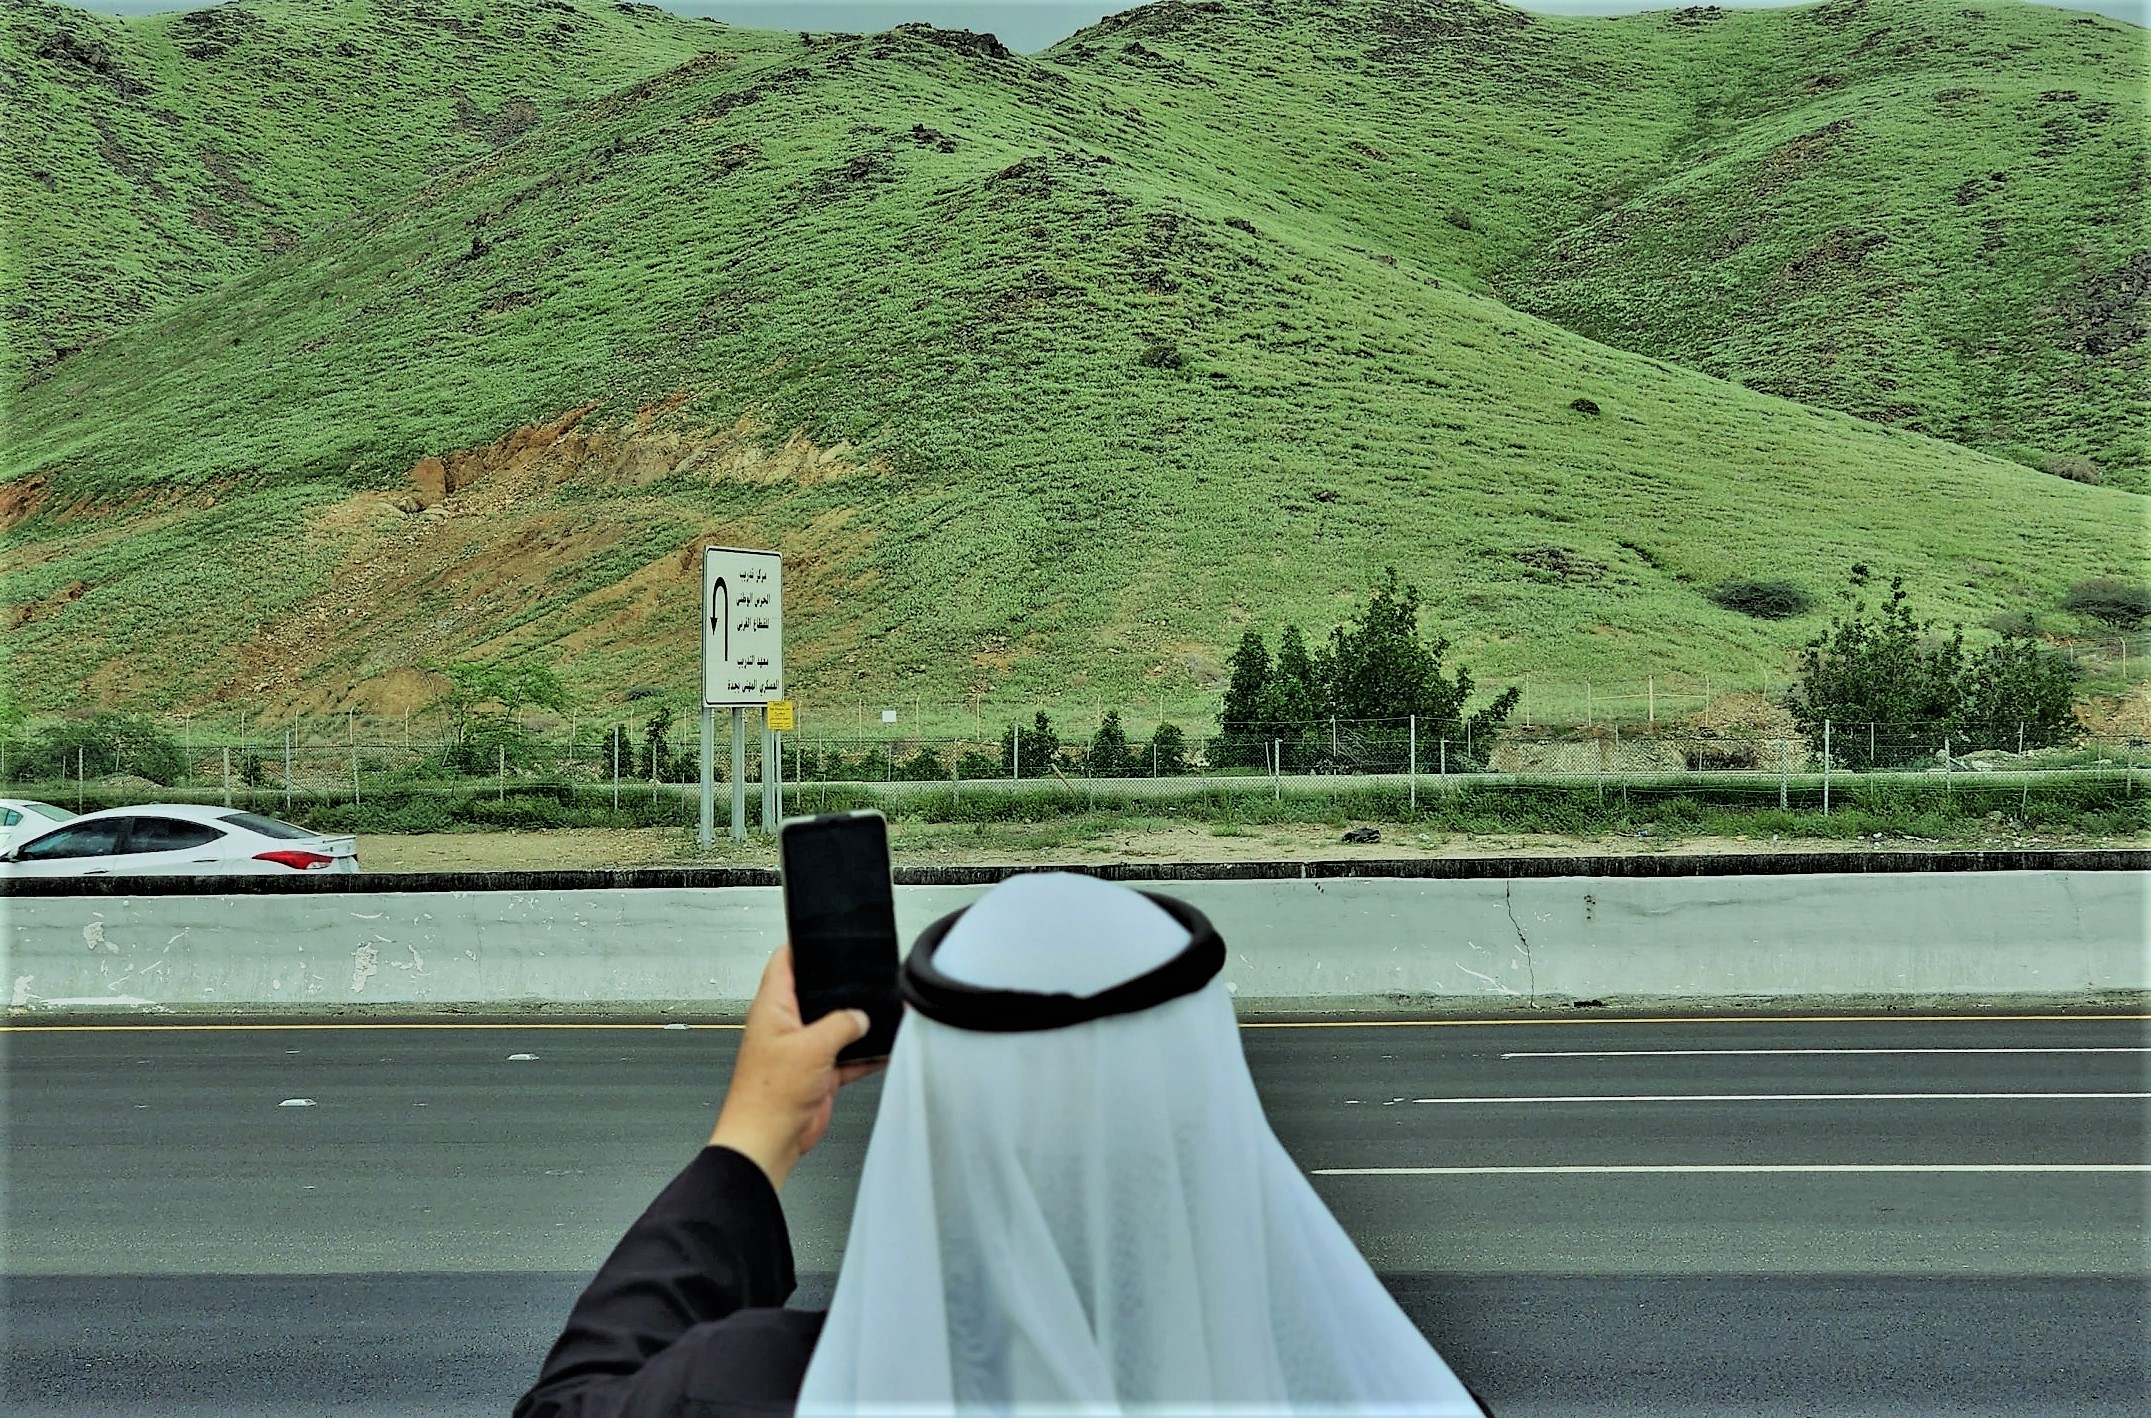 The desert country is filling the chest of Saudi Arabia with green